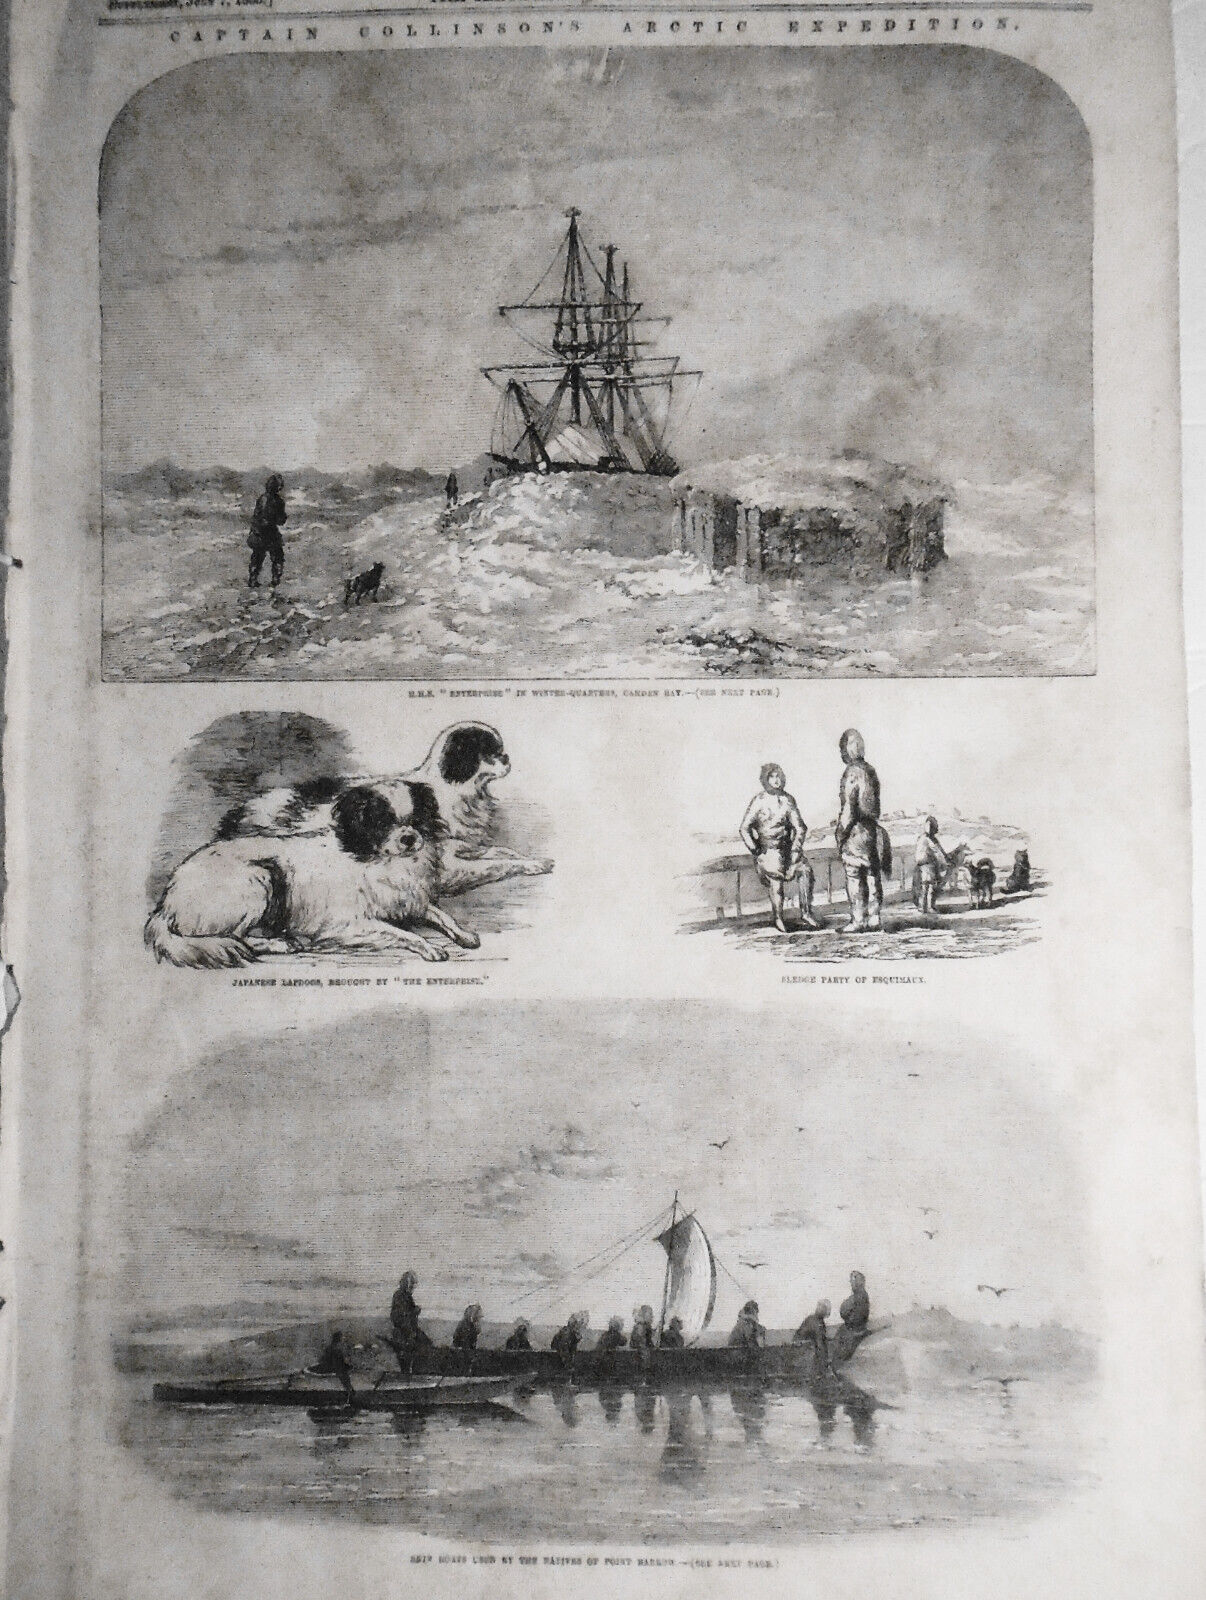 Captain Collinson\'s Arctic Expedition - llustrated London News July 7, 1855